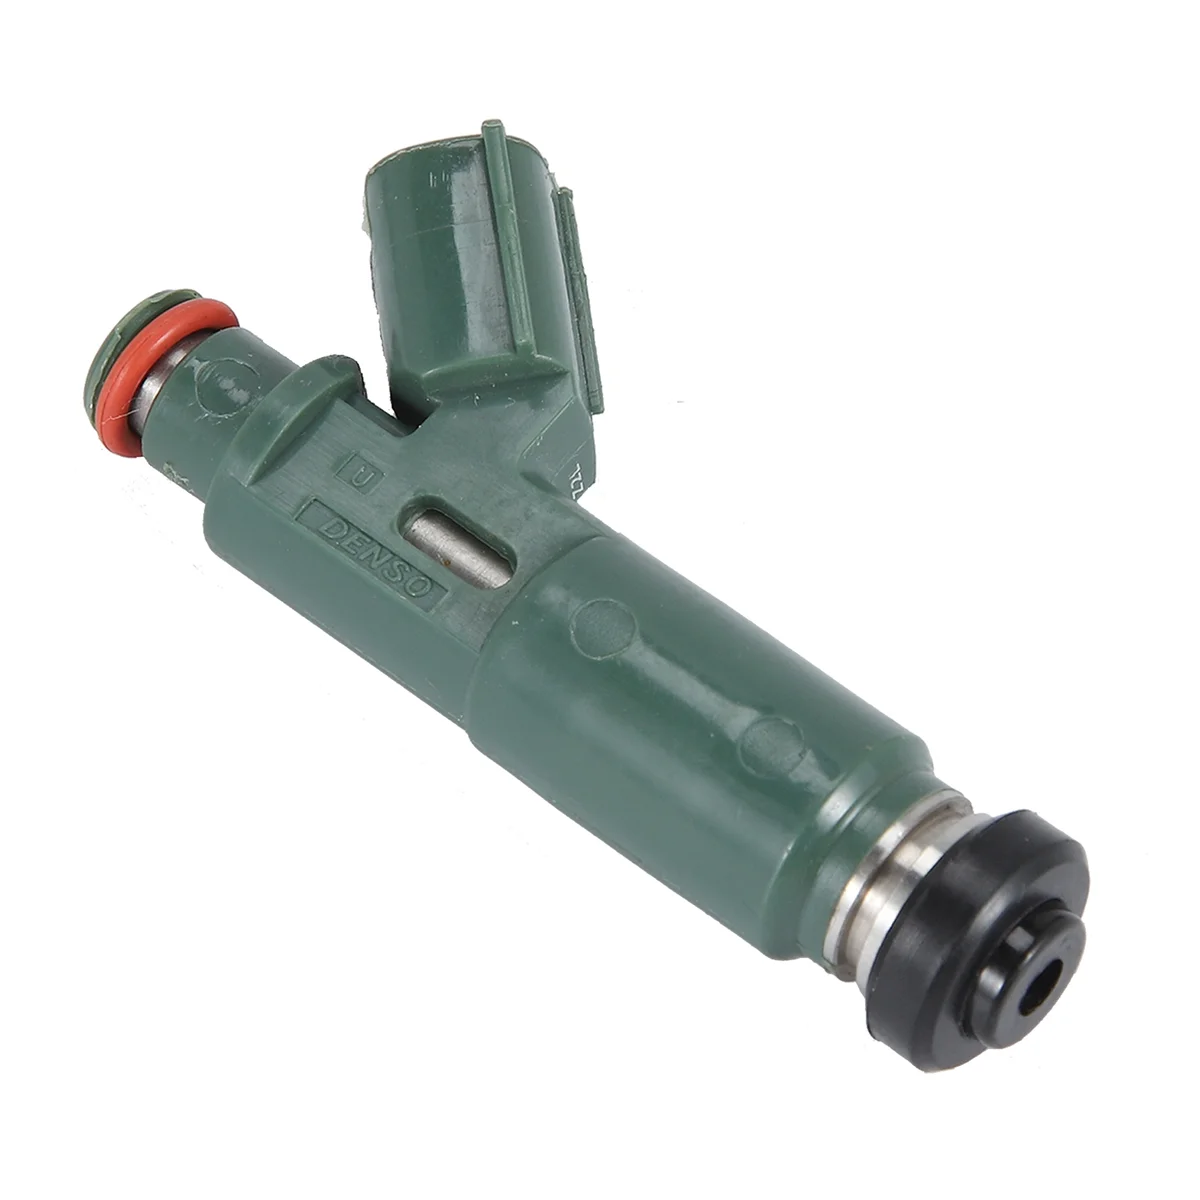 

Fuel Injector for 2000-2005 Toyota Celica MR2 Spyder 2000-2004 for Corolla 03-06 Matrix 00-02 Chevy Prizm 03-06 2325022040